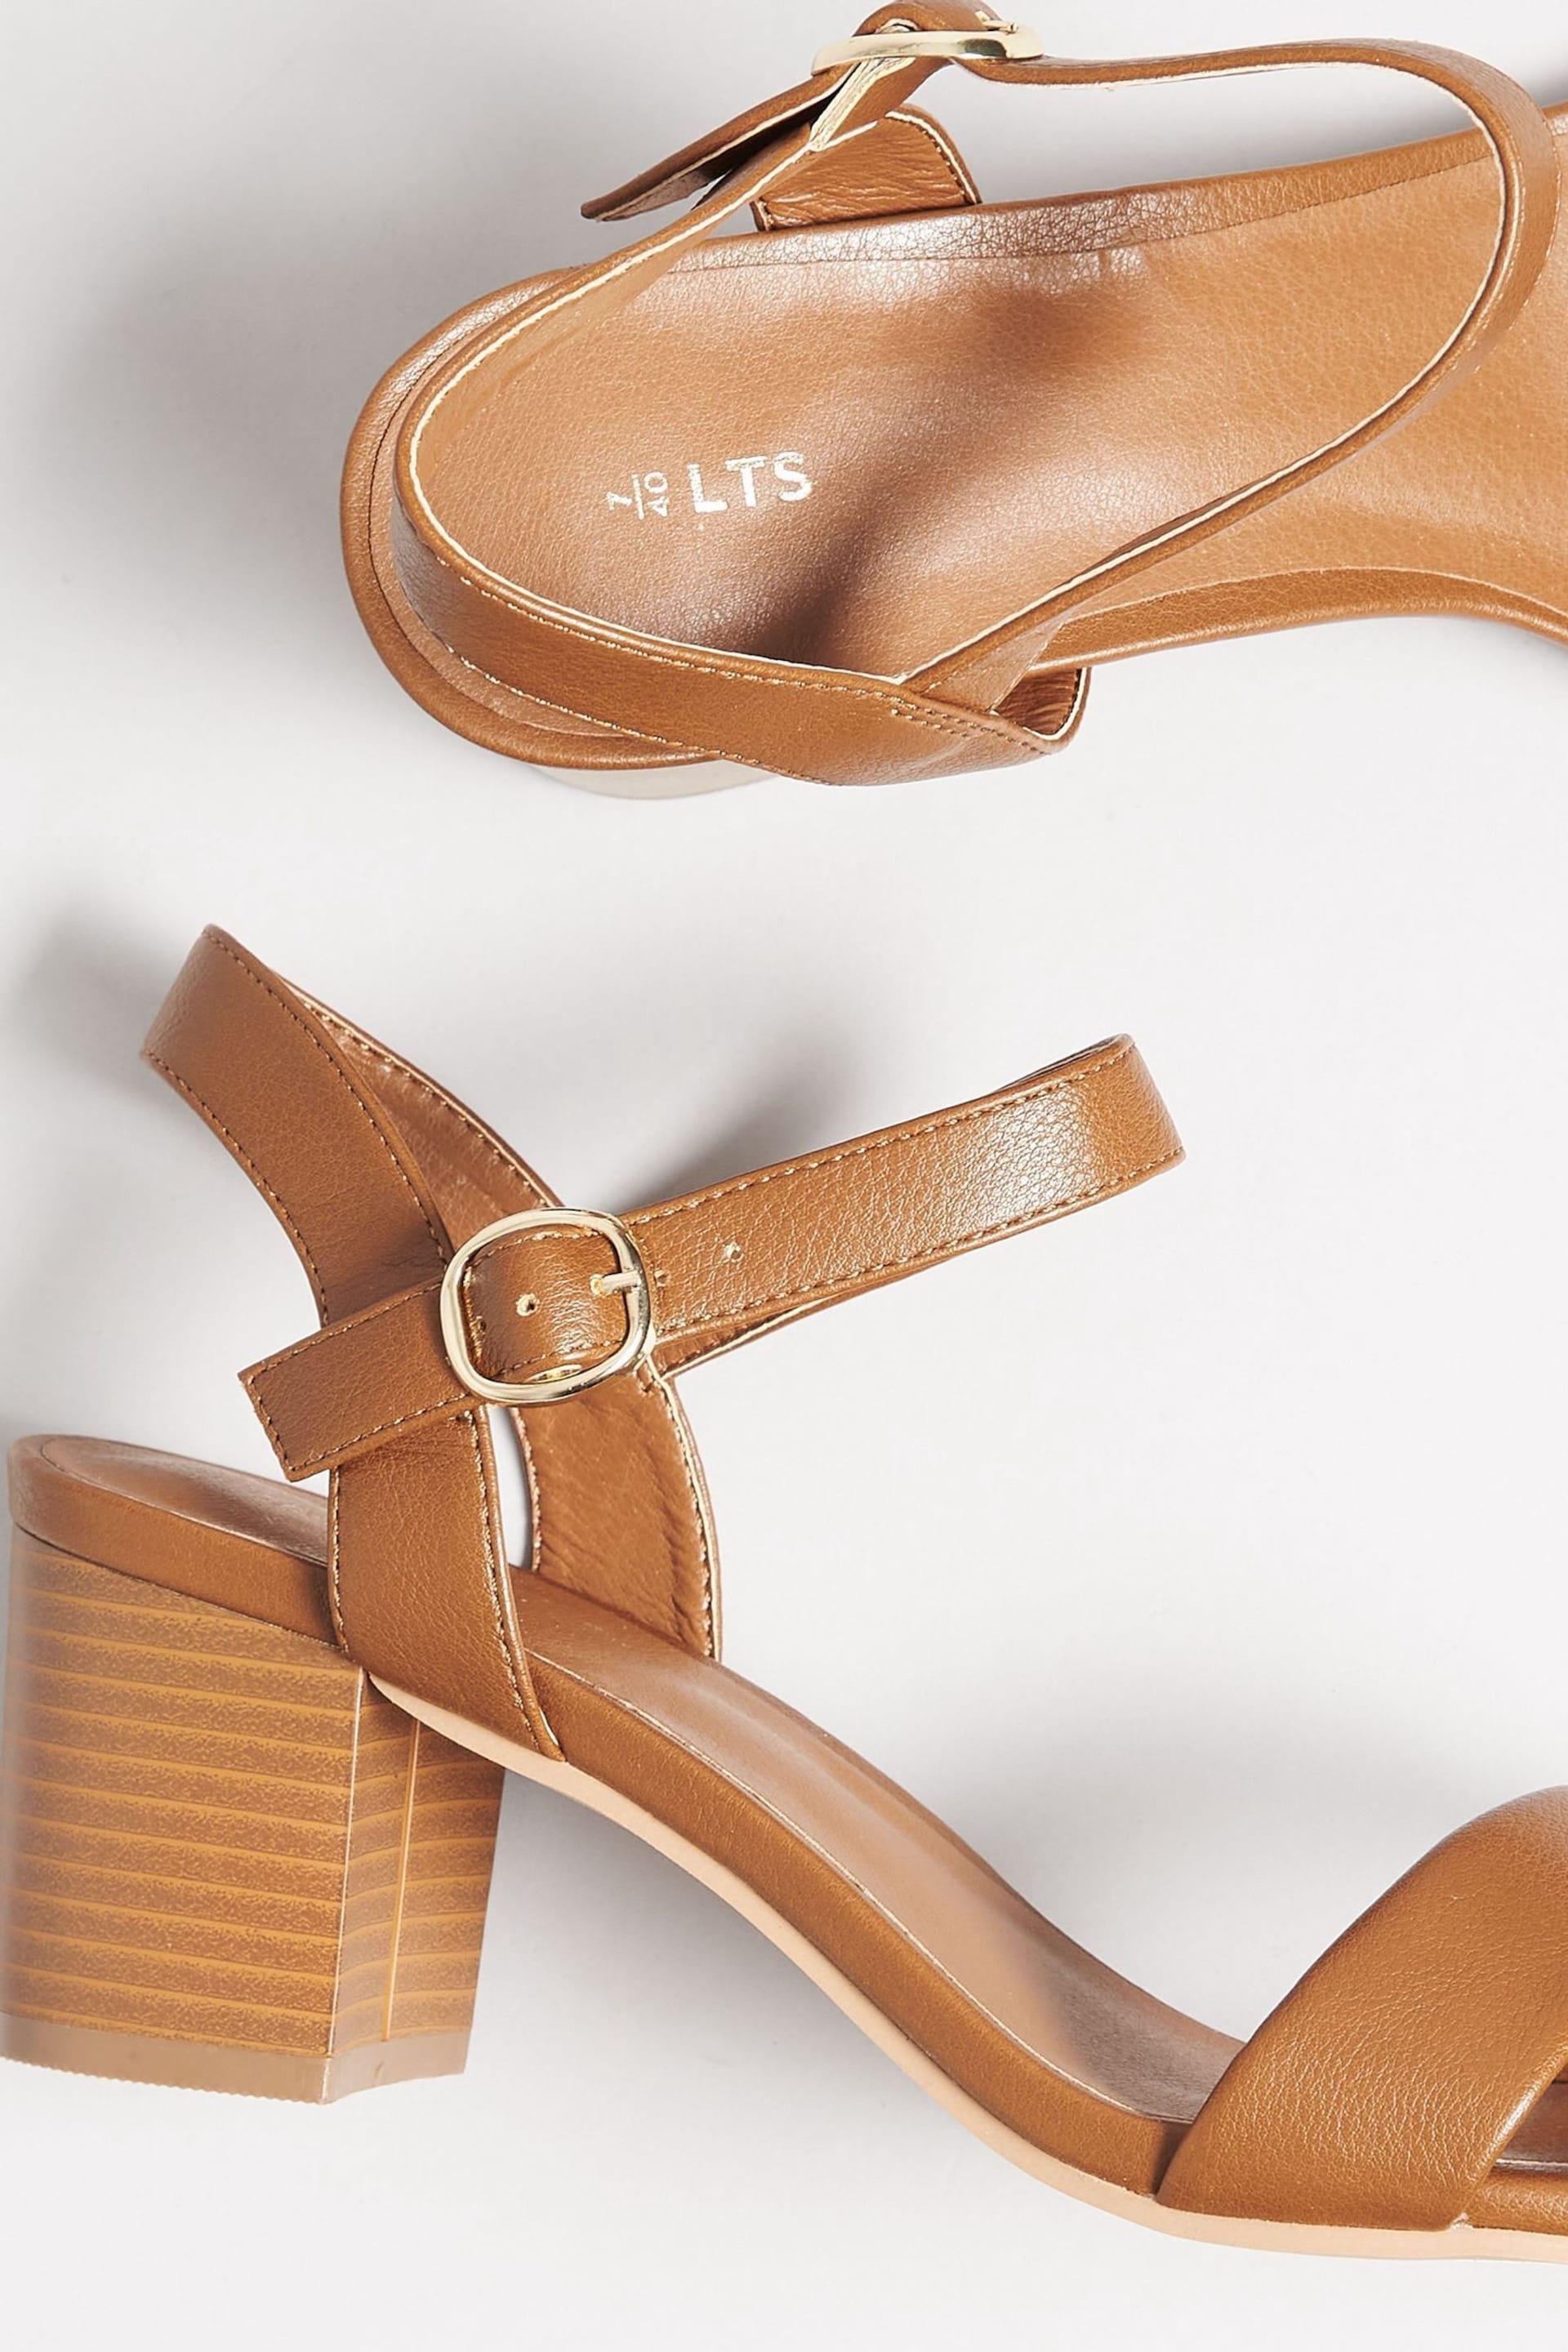 Long Tall Sally Brown Faux Leather Block Heel Sandals - Image 4 of 5